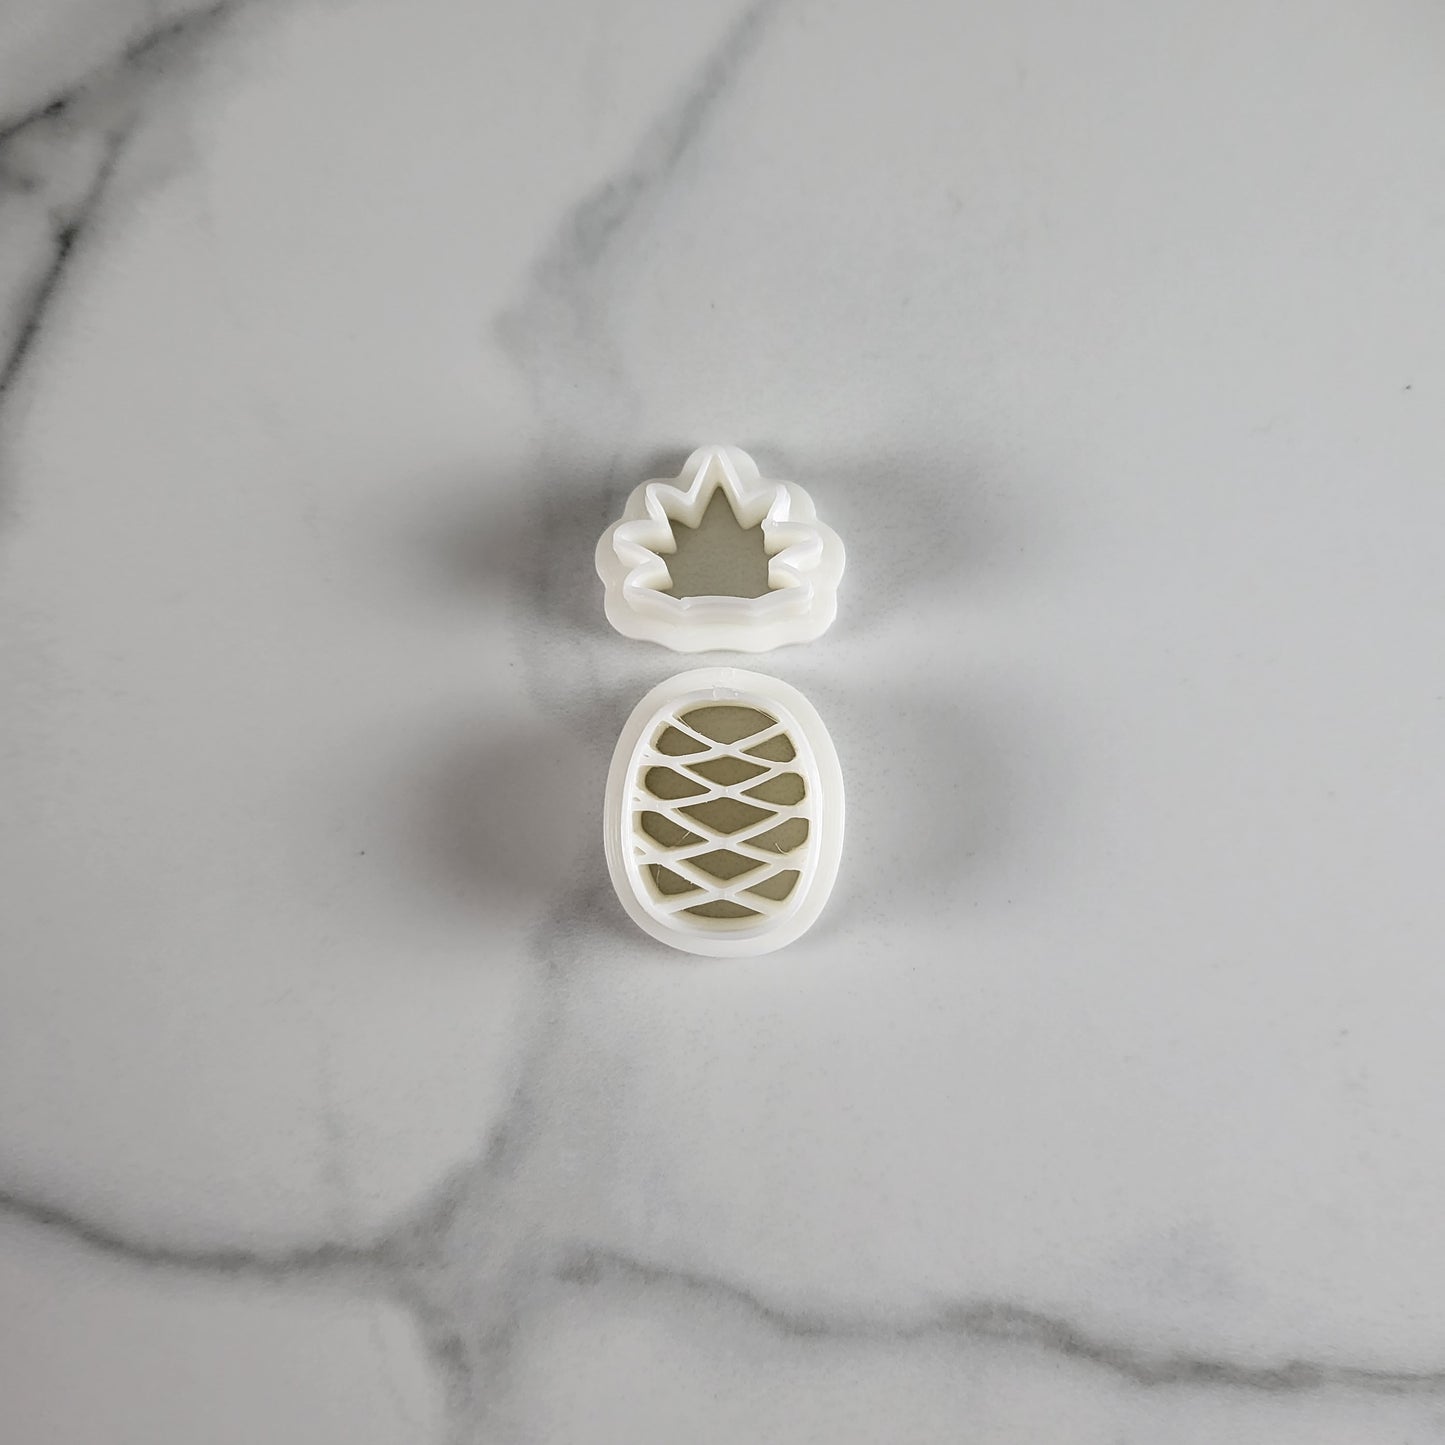 2 Piece Pineapple Clay Cutter